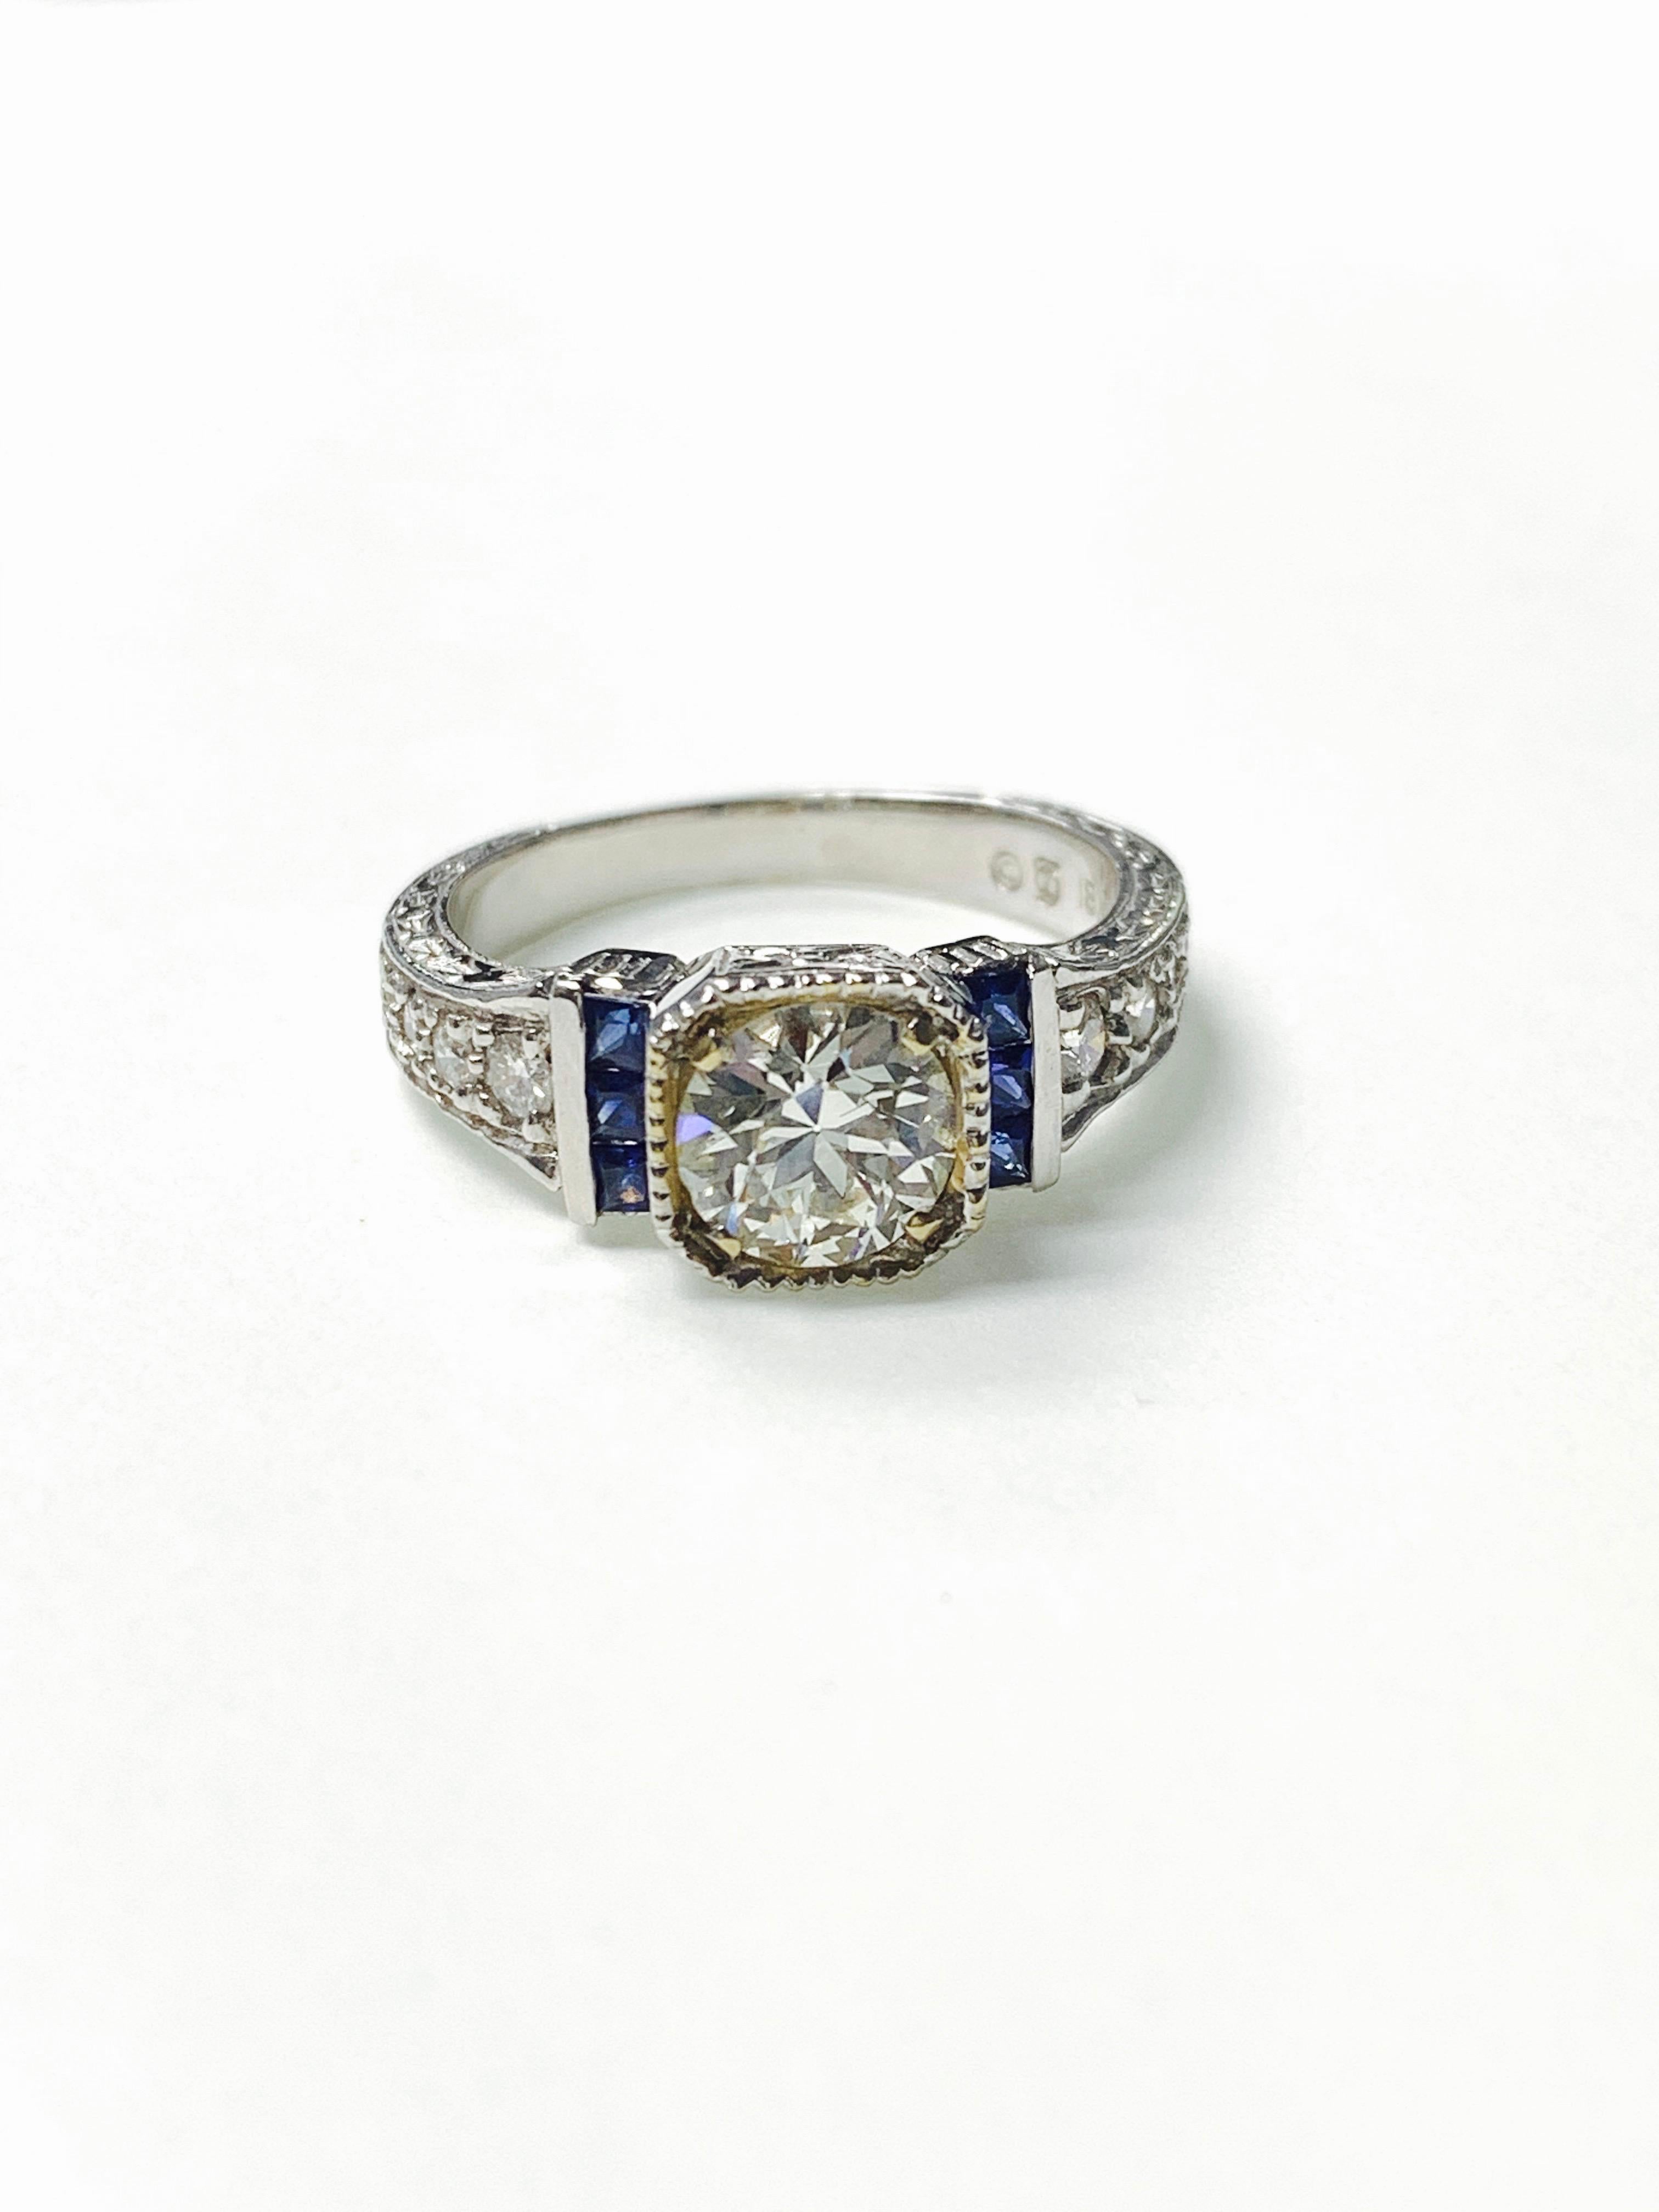 White Old European Cut Diamond and Blue Sapphire Ring in 18 Karat Gold For Sale 2